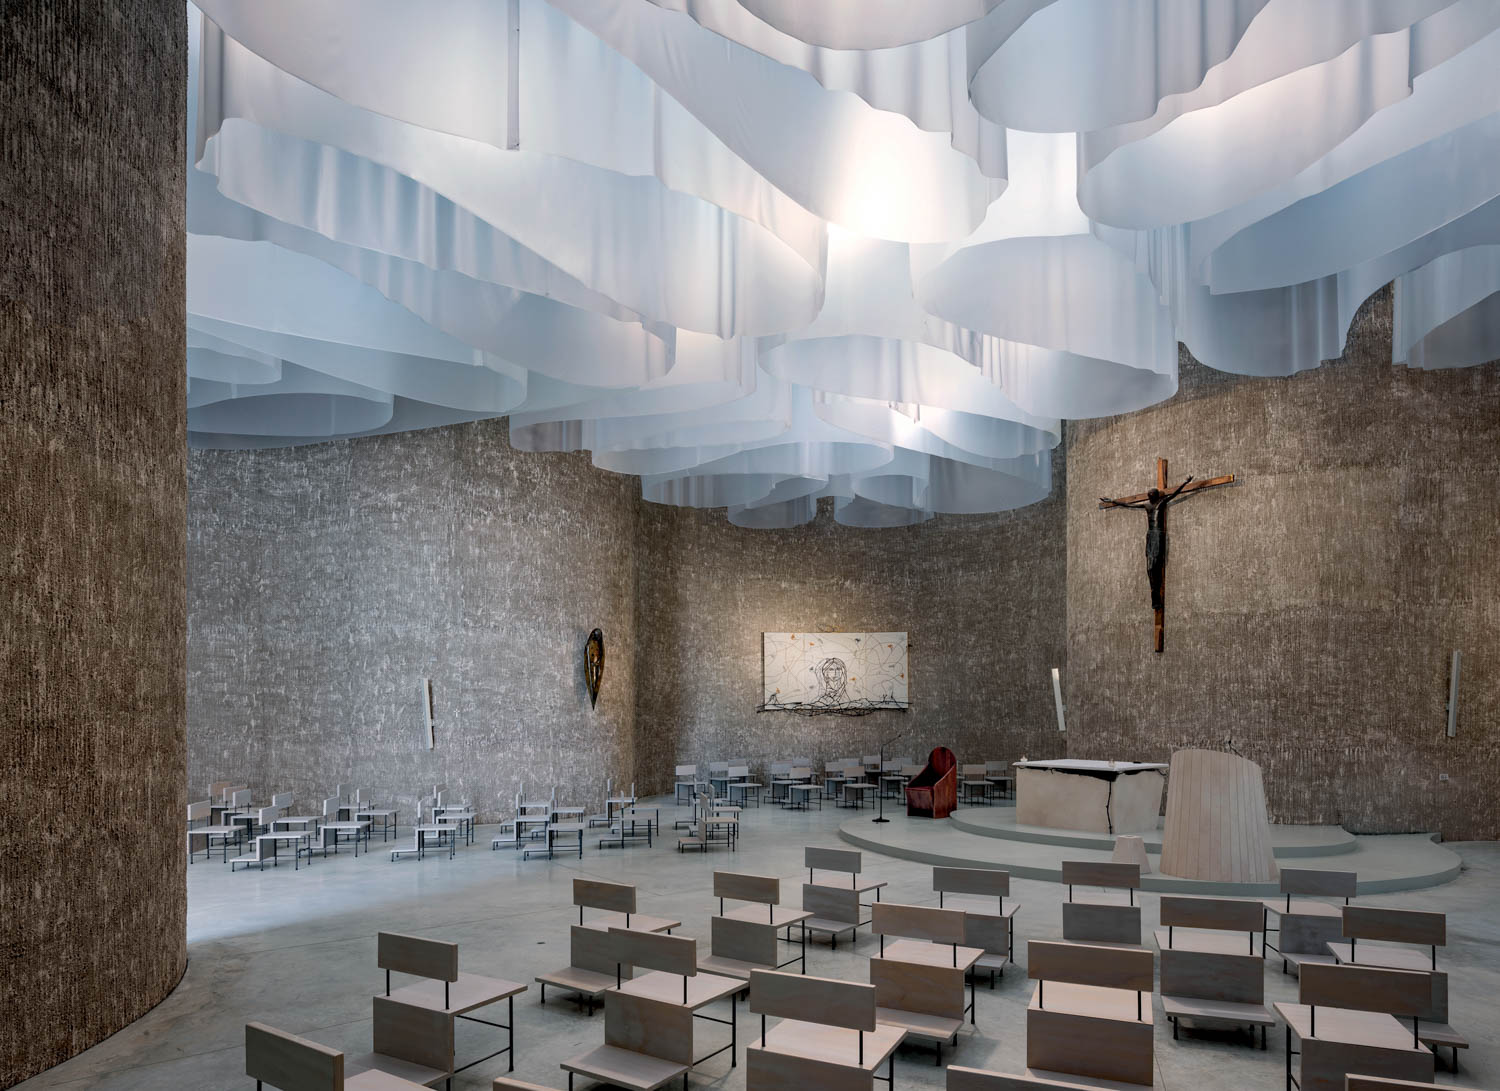 The church interior featuring walls of hemp-and-lime render and light-diffusing drapes.